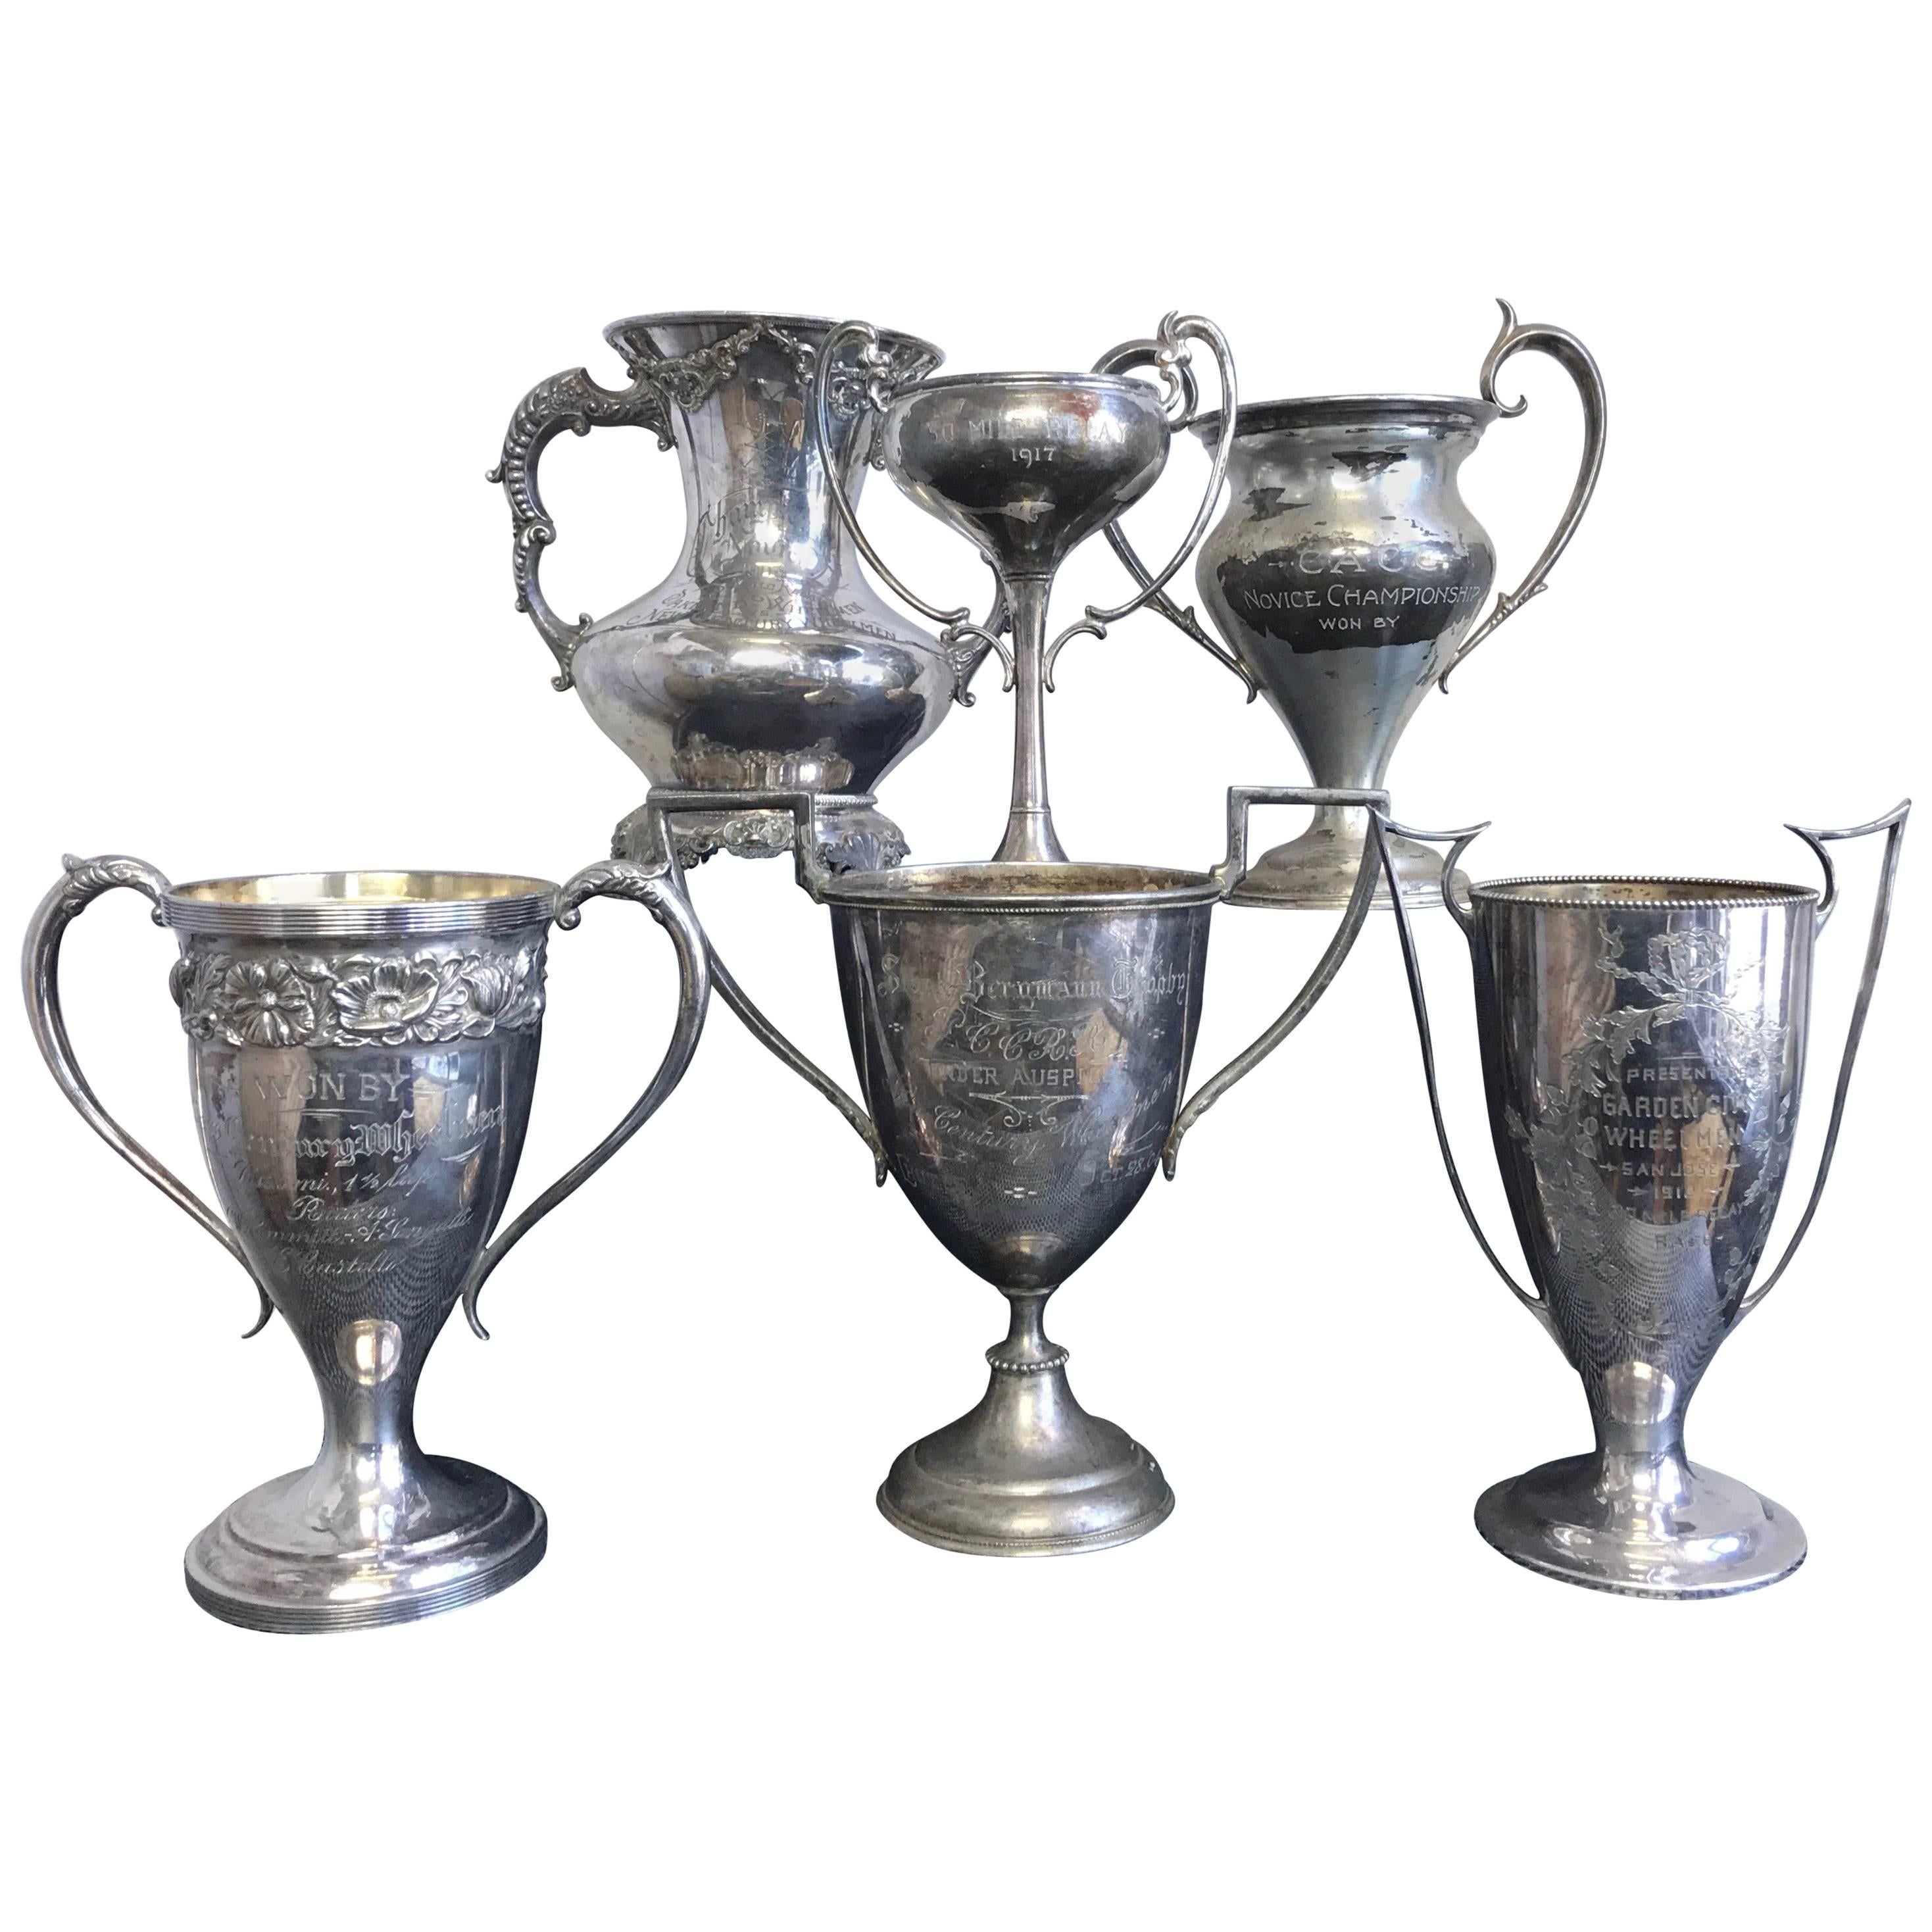 Group of Six Early 1900s California Bay Area Silverplate Cycling Trophies